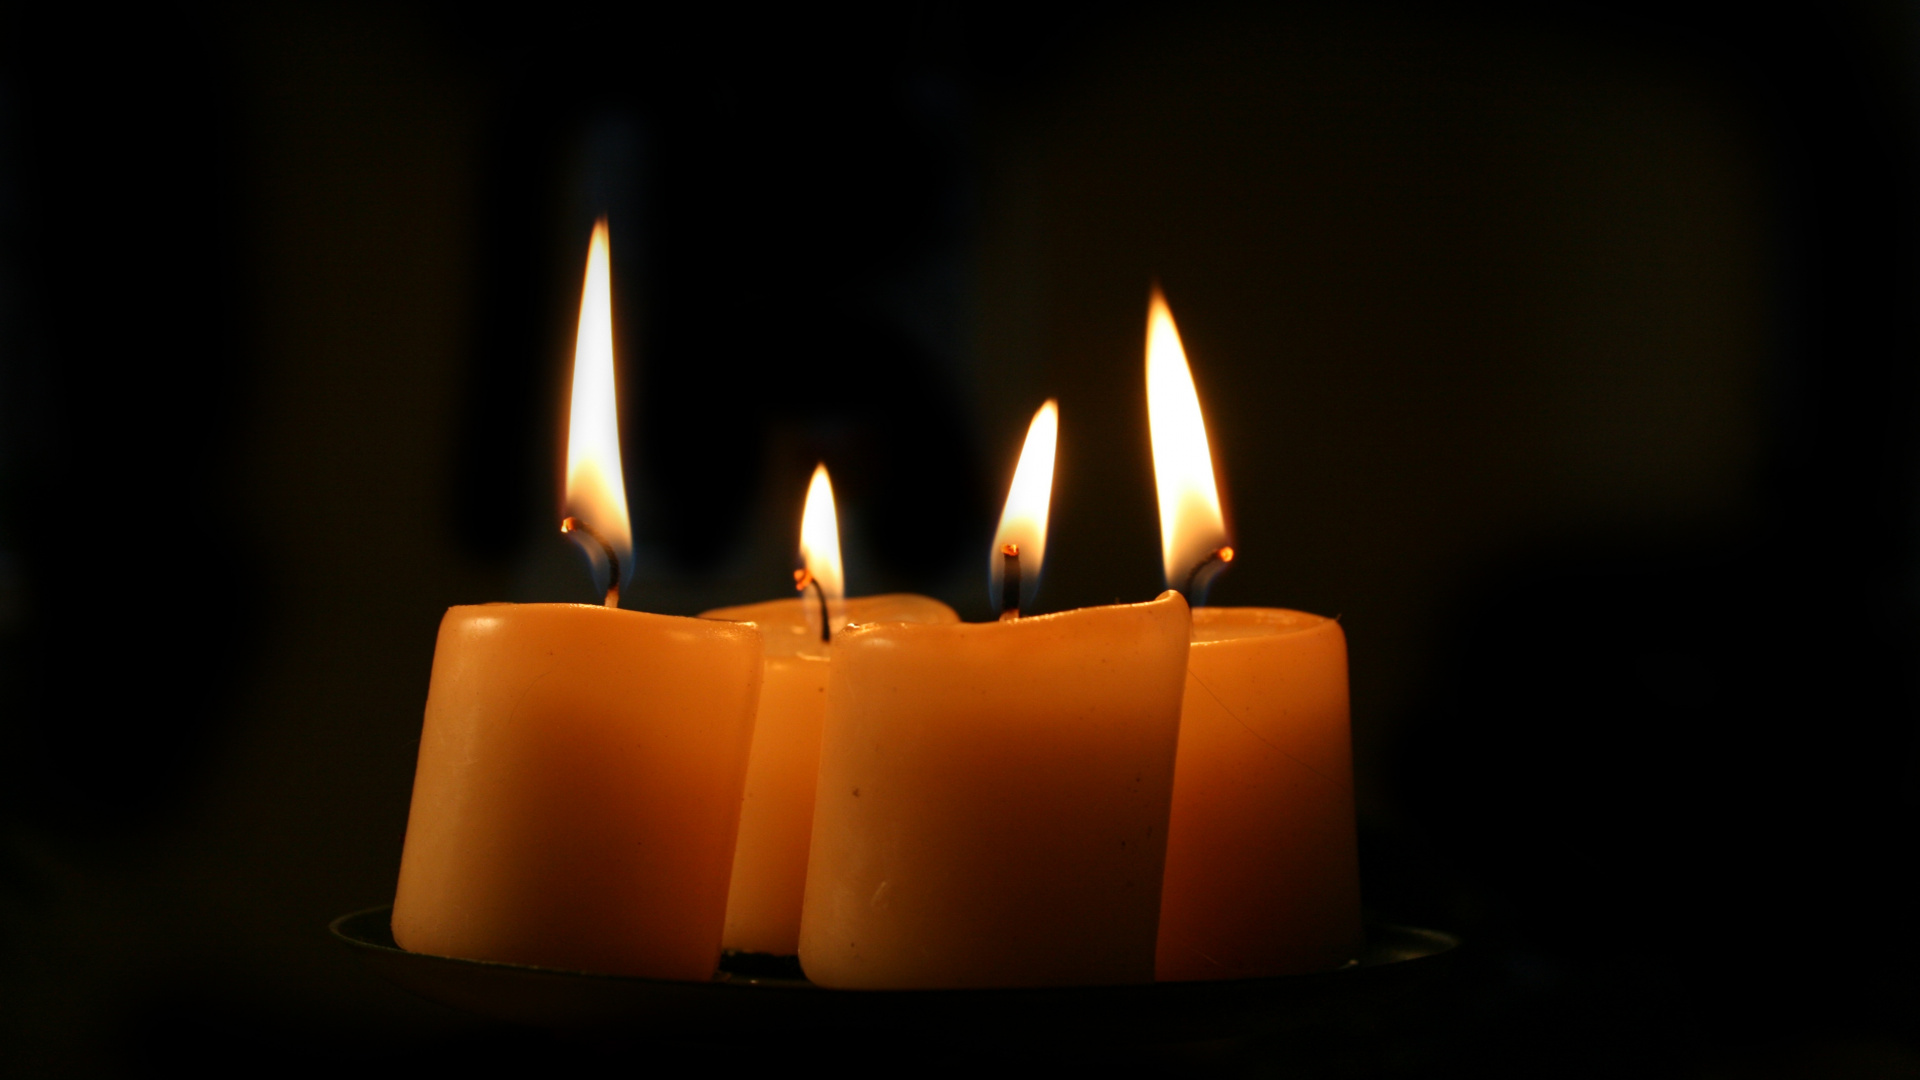 3 Lighted Candles on Black Background. Wallpaper in 1920x1080 Resolution